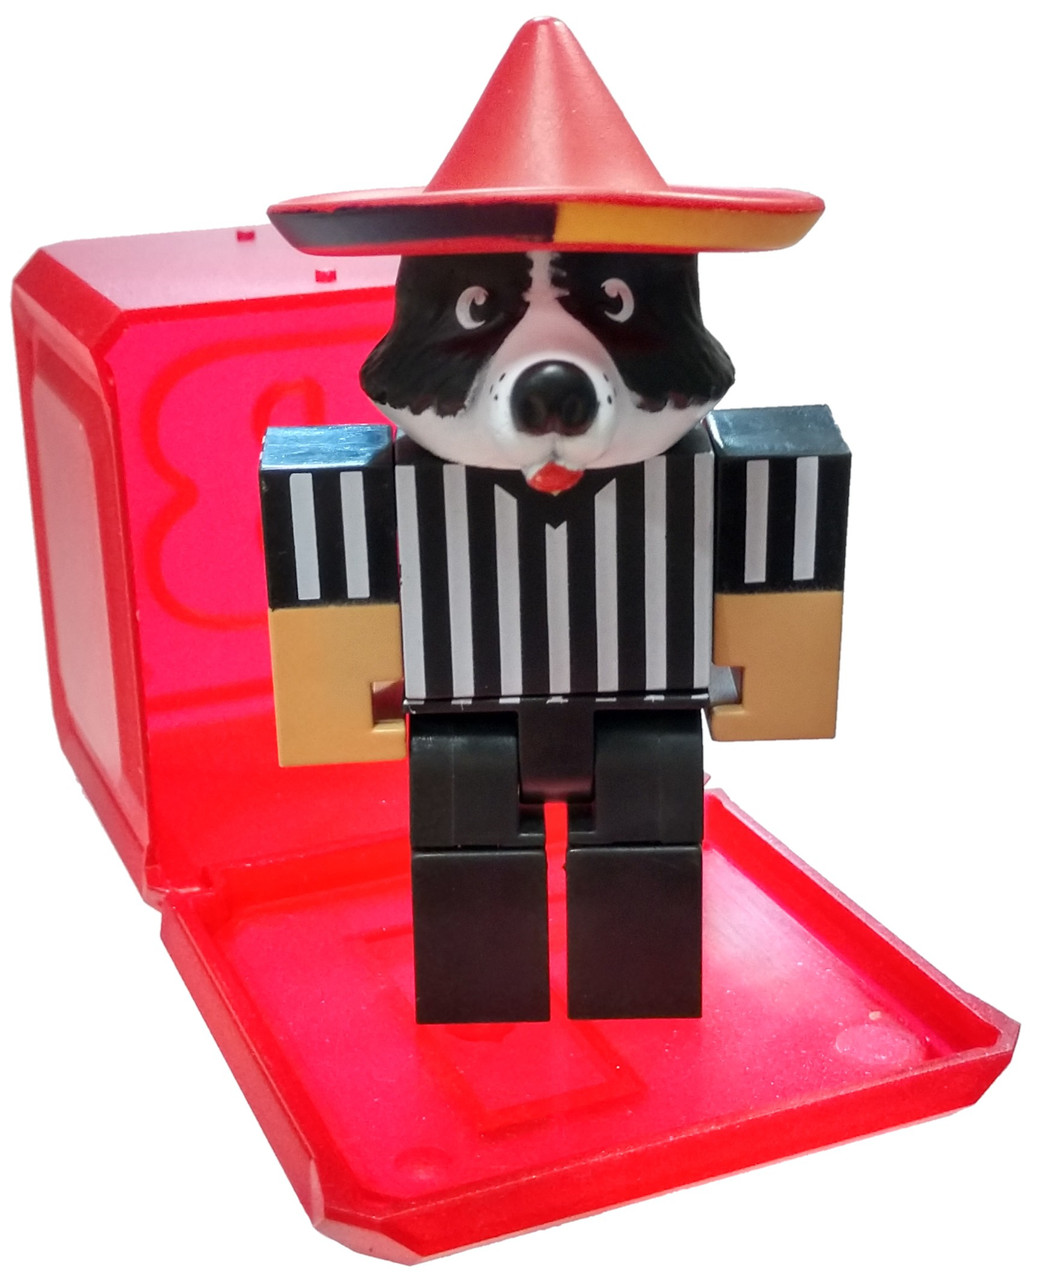 Roblox Celebrity Collection Series 5 High School Life Referee 3 Mini Figure With Red Cube And Online Code Loose Jazwares Toywiz - this hat previously named beach knight was updated roblox